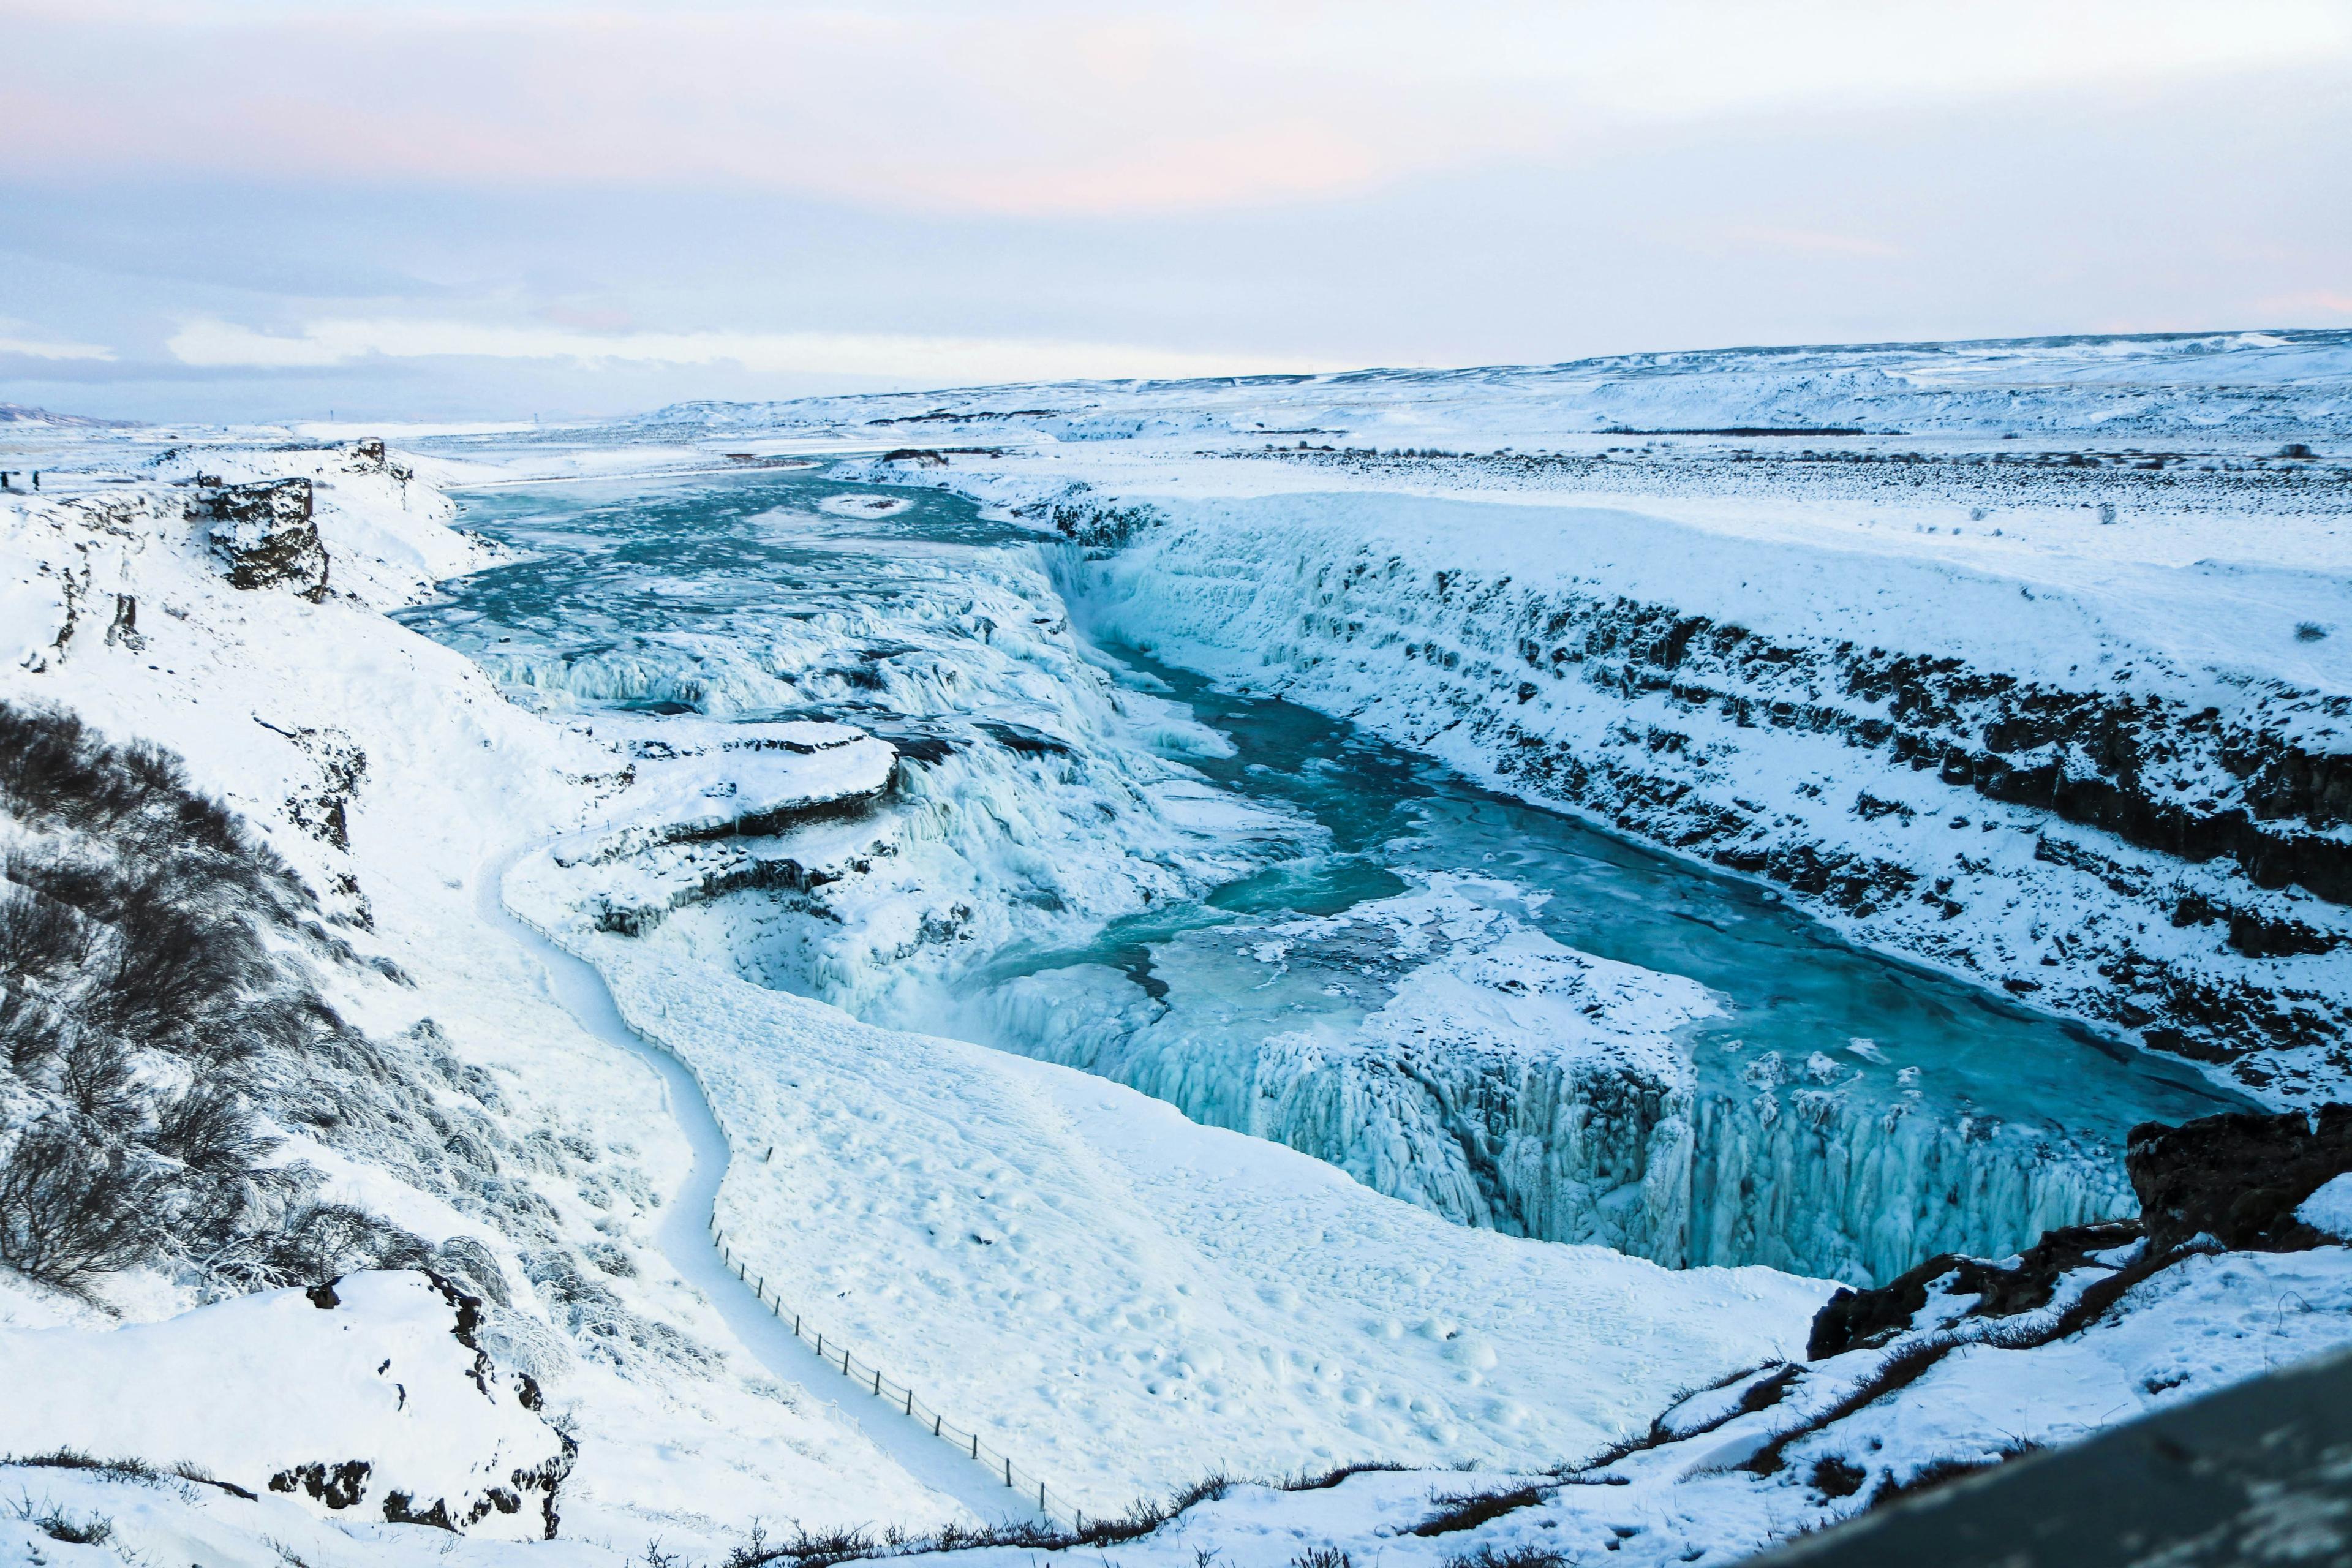  A stunning winter scene of Gullfoss waterfall in Iceland, partially frozen over. The powerful cascades are now solid ice, forming intricate patterns and icicles hanging from the edges. The rugged canyon is blanketed in snow, with the icy river below reflecting the pale winter light. 